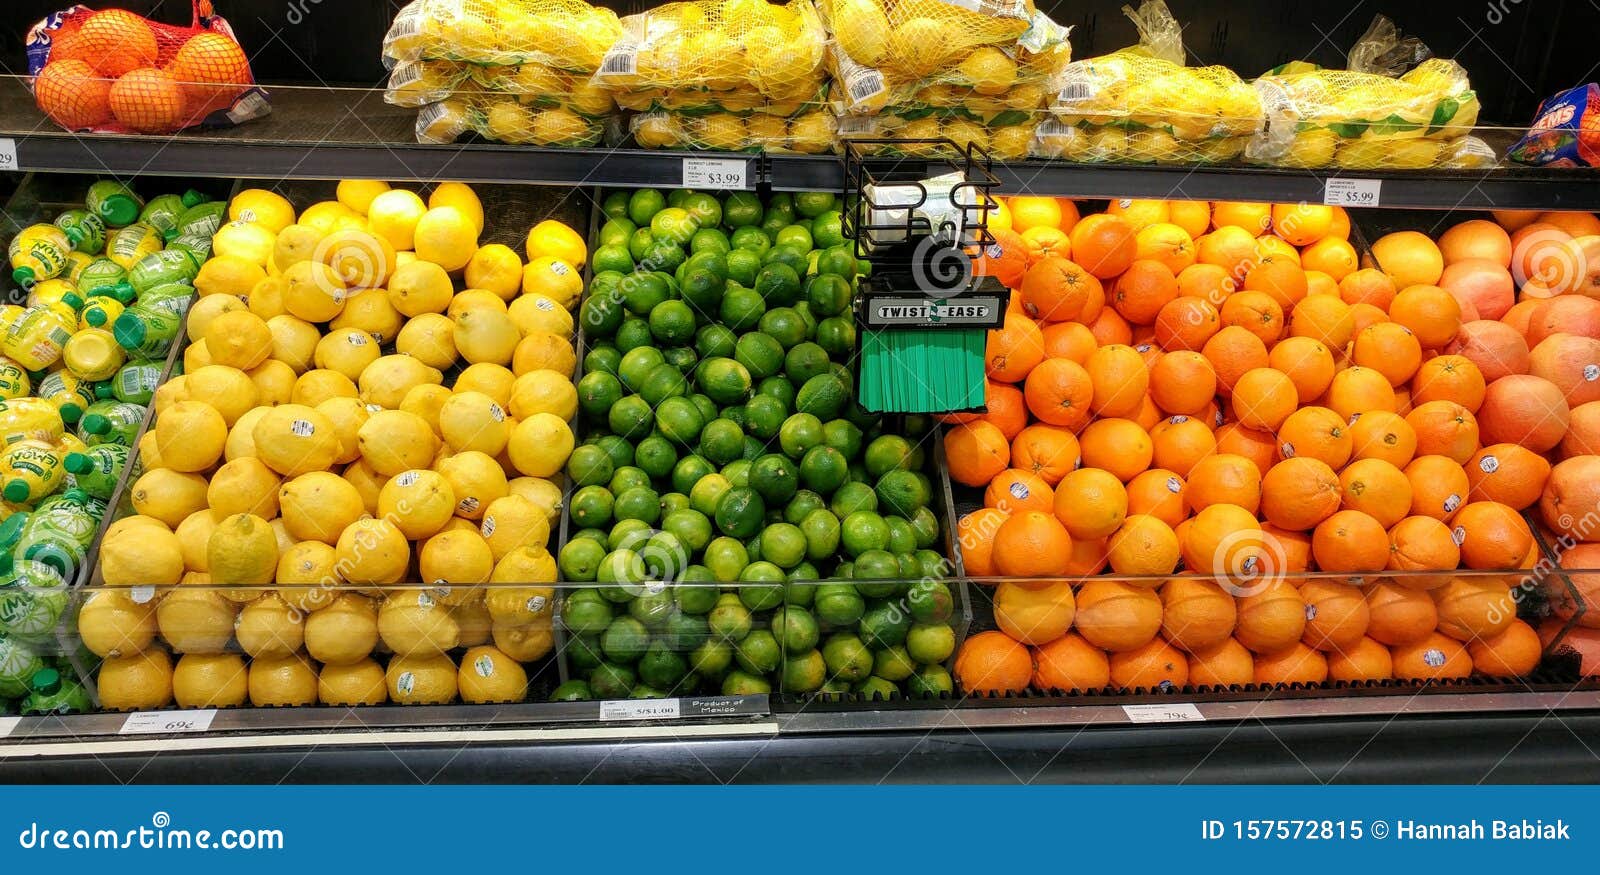 Citrus Display, Produce, at Grocery Store Editorial Image Image of